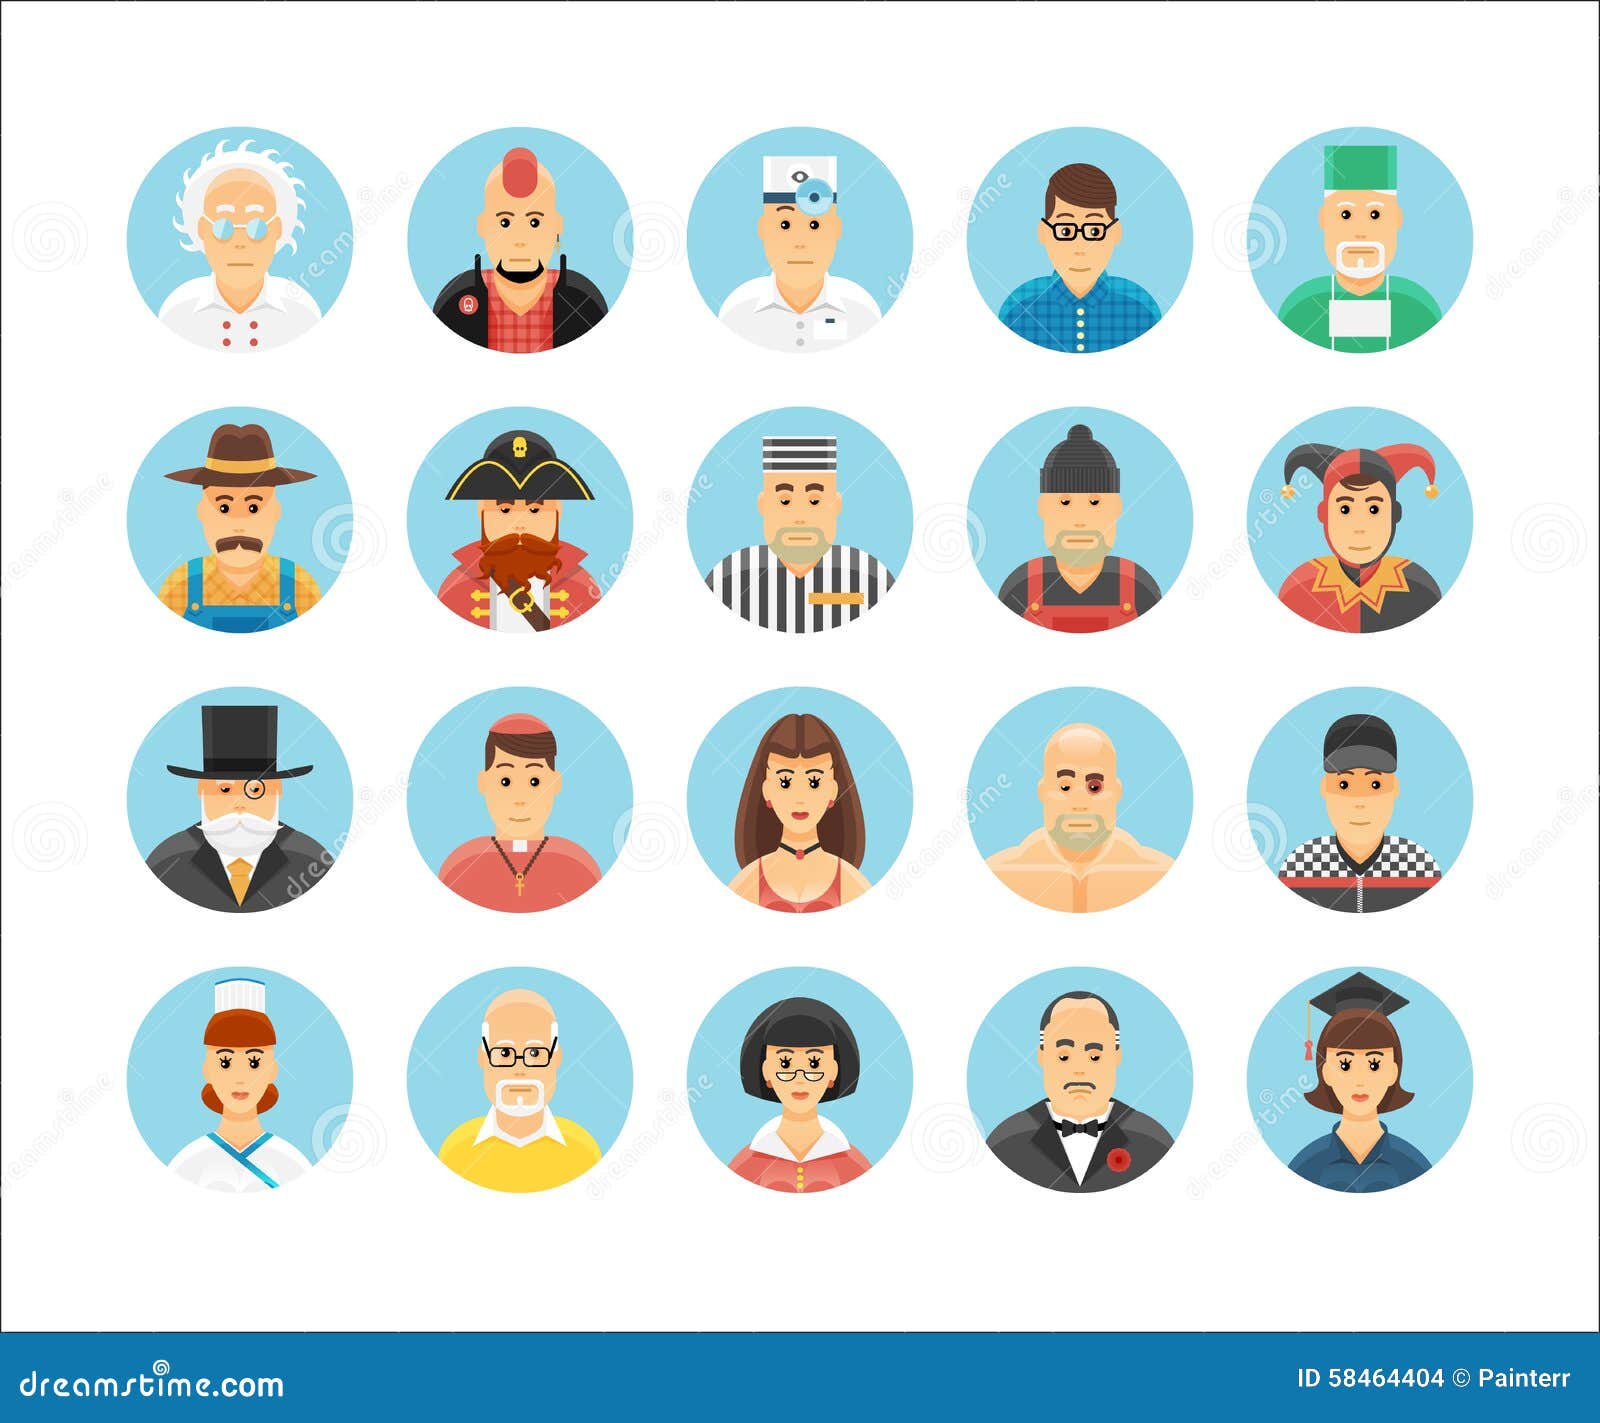 characters and persons icons collection. icons set illustrating people occupations, lifestyles, nations and cultures.